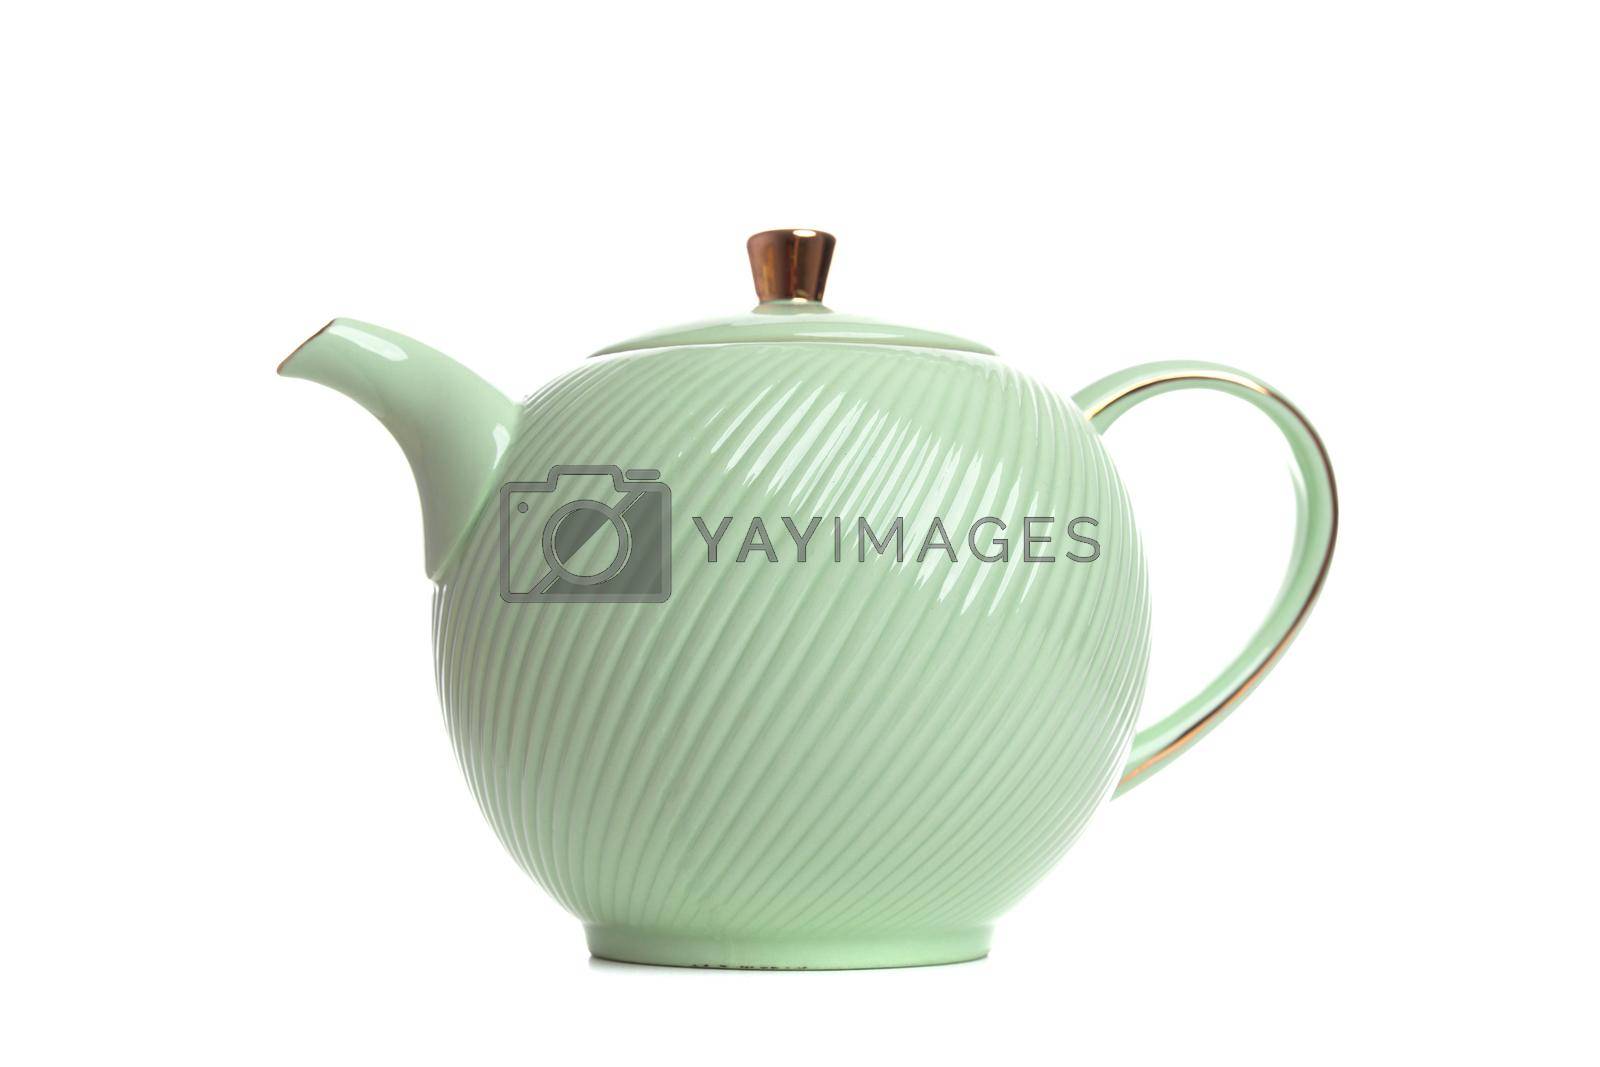 Royalty free image of light green porcelain teapot for making tea on a white background by TRMK